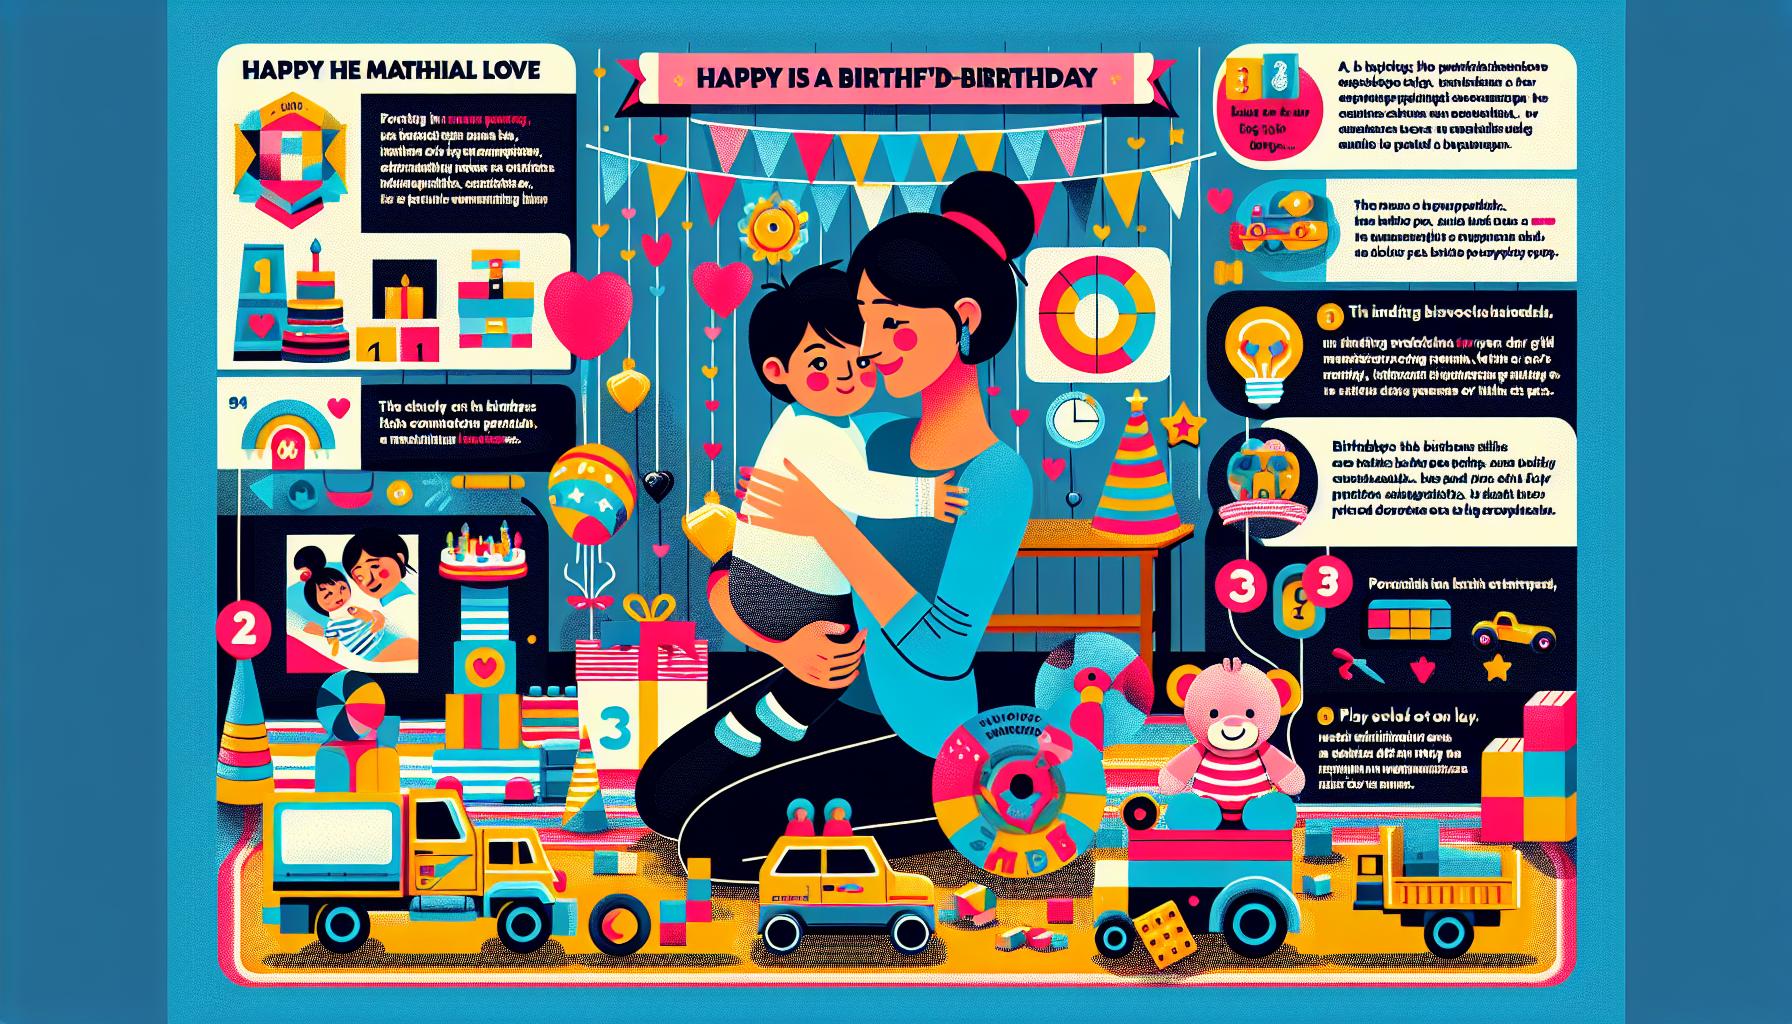 Creating Unforgettable 3rd Birthday Wishes For Your Son: A Mother's Guide